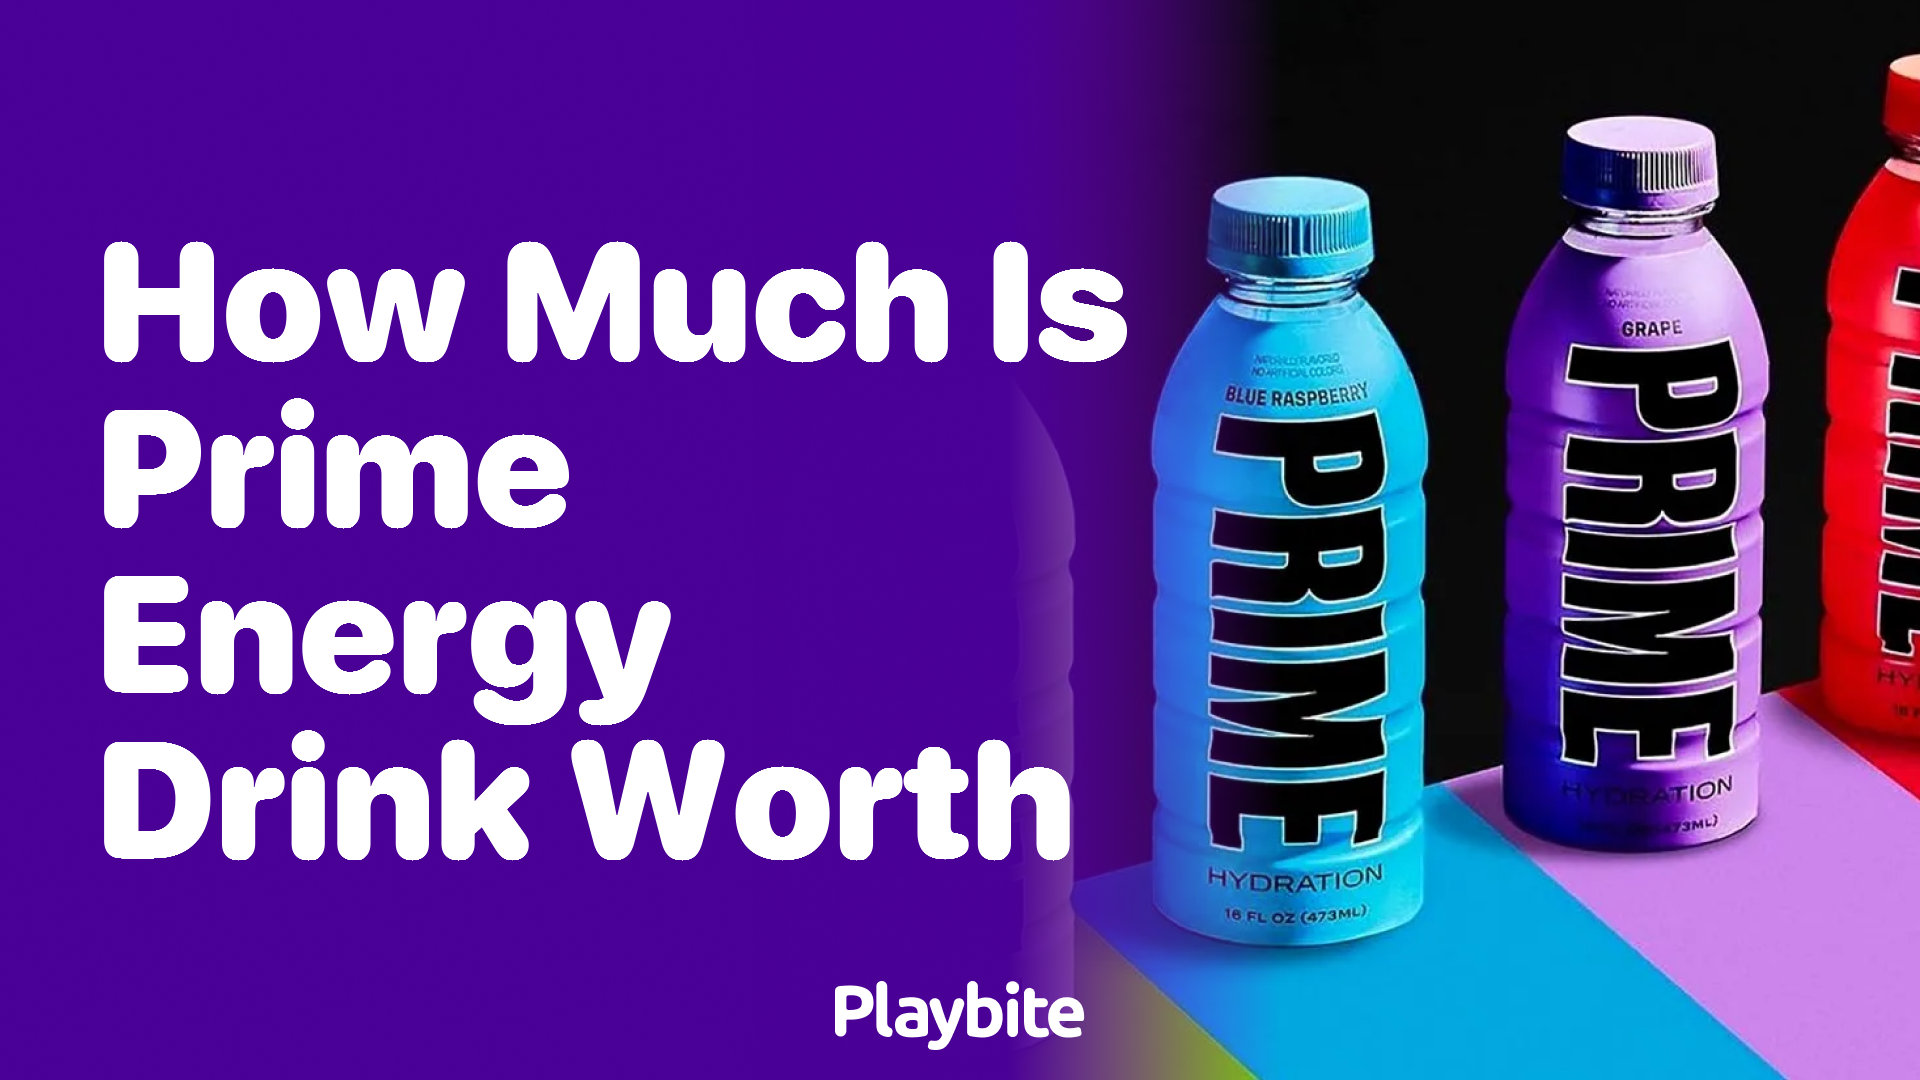 How Much Does a Prime Energy Drink Cost? - Playbite